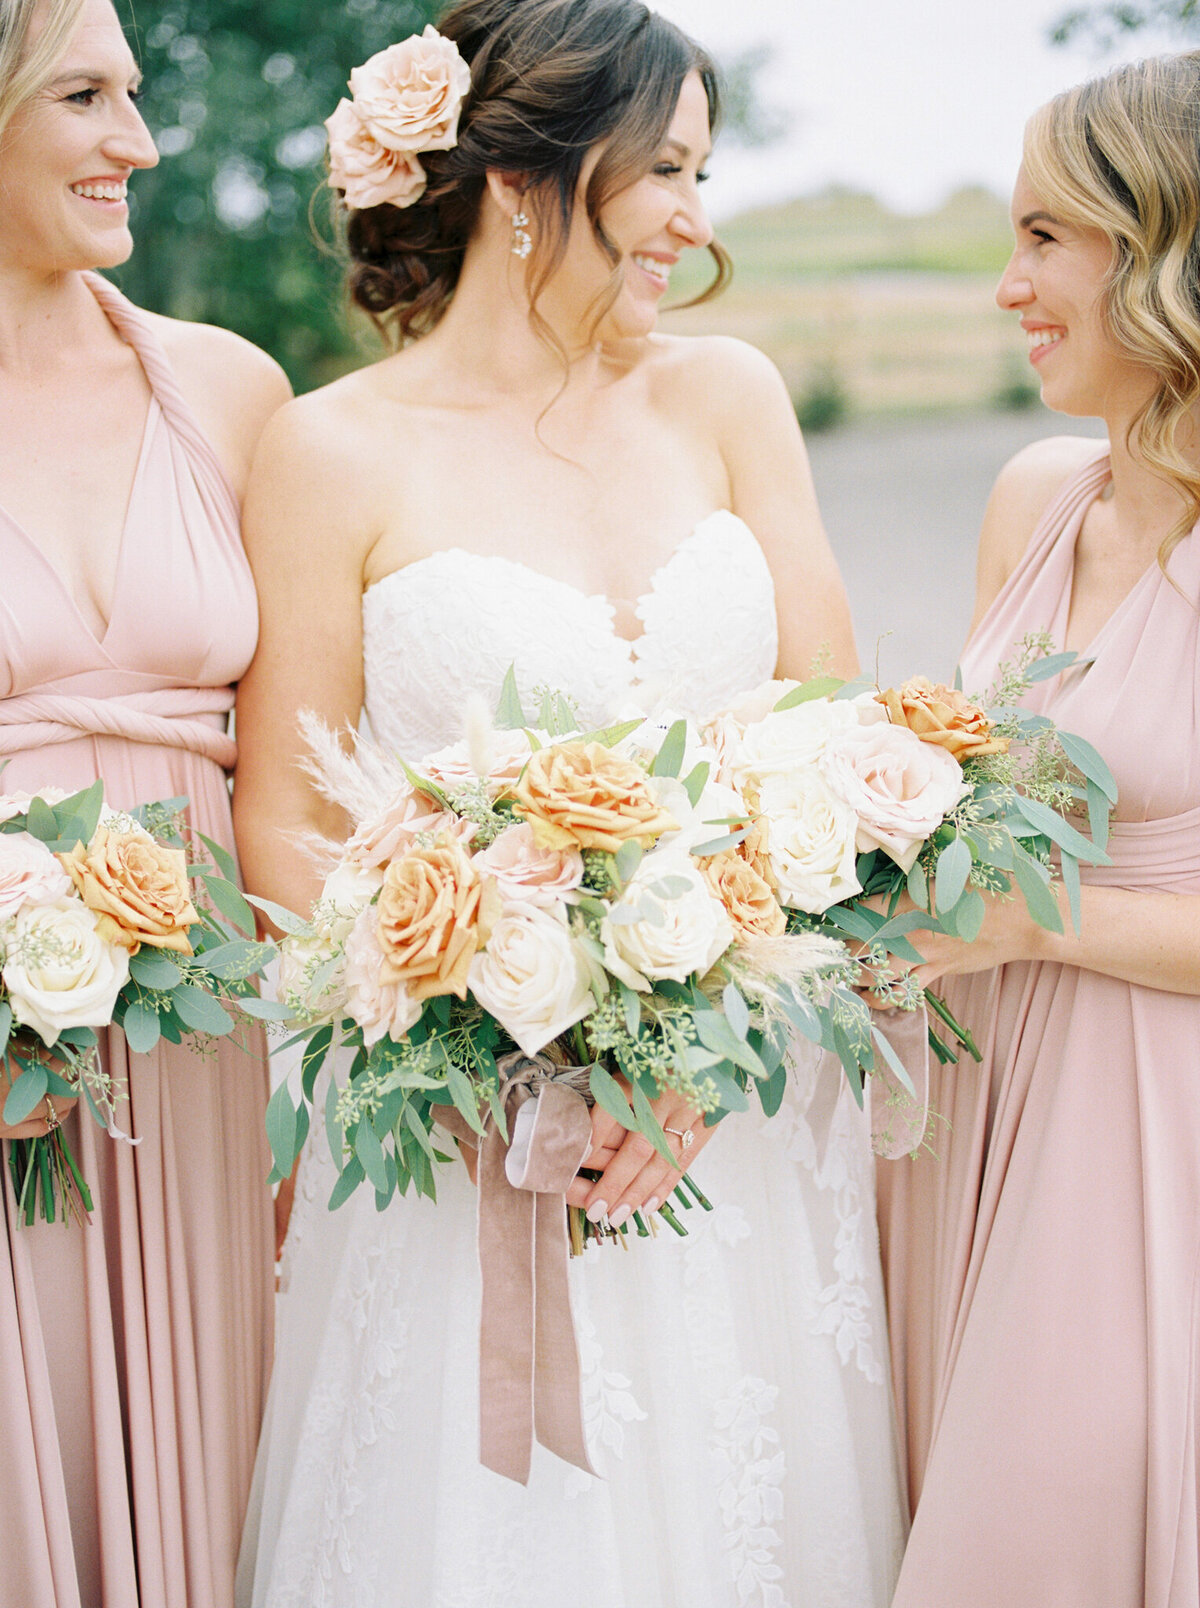 Bright and romantic orange, pink and white bouquet by Lovella Lifestyle, whimsical and romantic Edmonton wedding florist, featured on the Brontë Bride Vendor Guide.